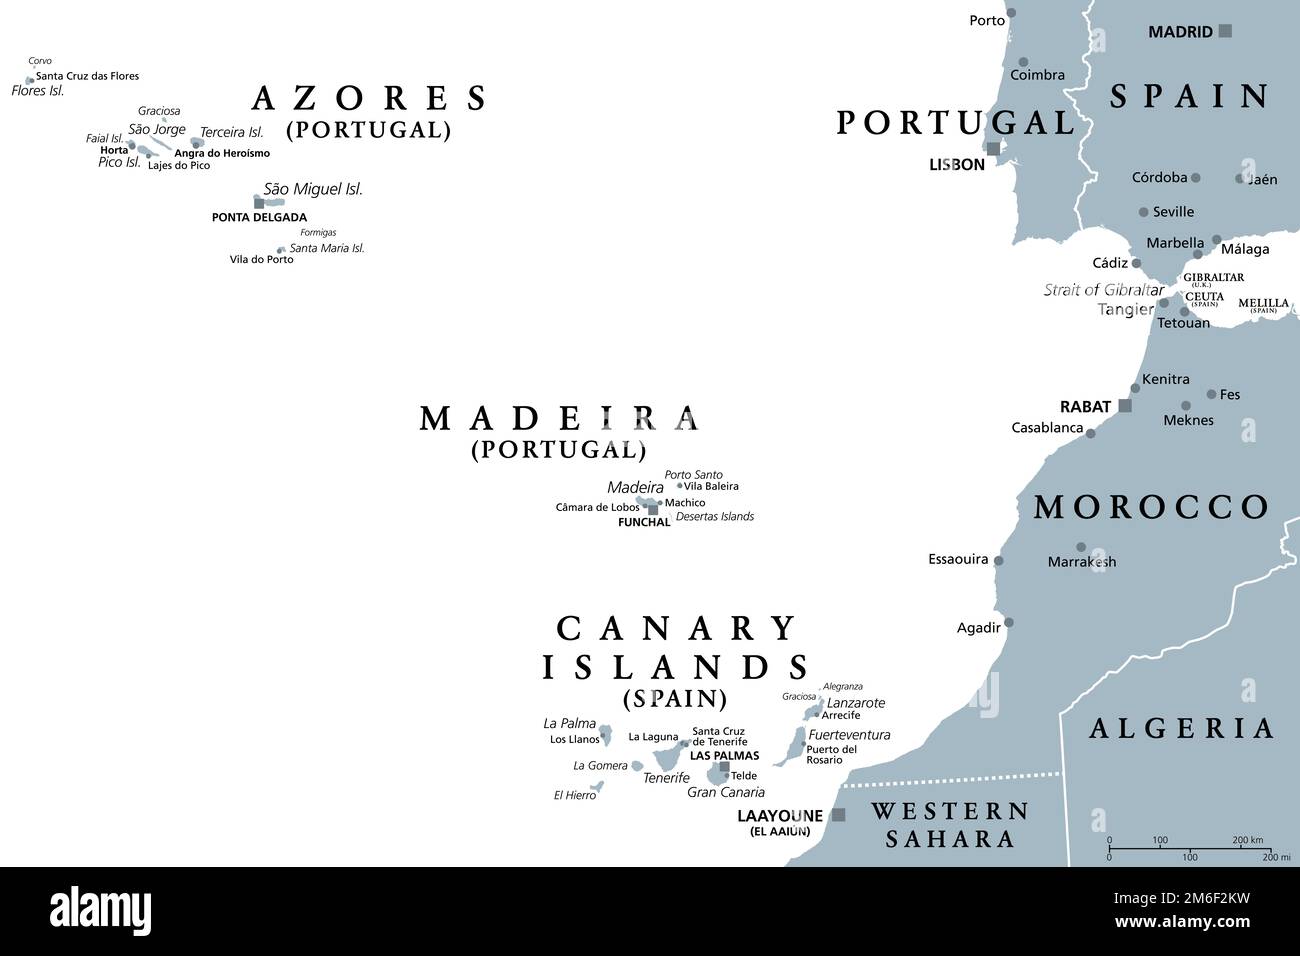 Azores, Madeira, and Canary Islands, gray political map. Autonomous regions of Portugal and Spain, archipelagos of volcanic islands in Macaronesia. Stock Photo